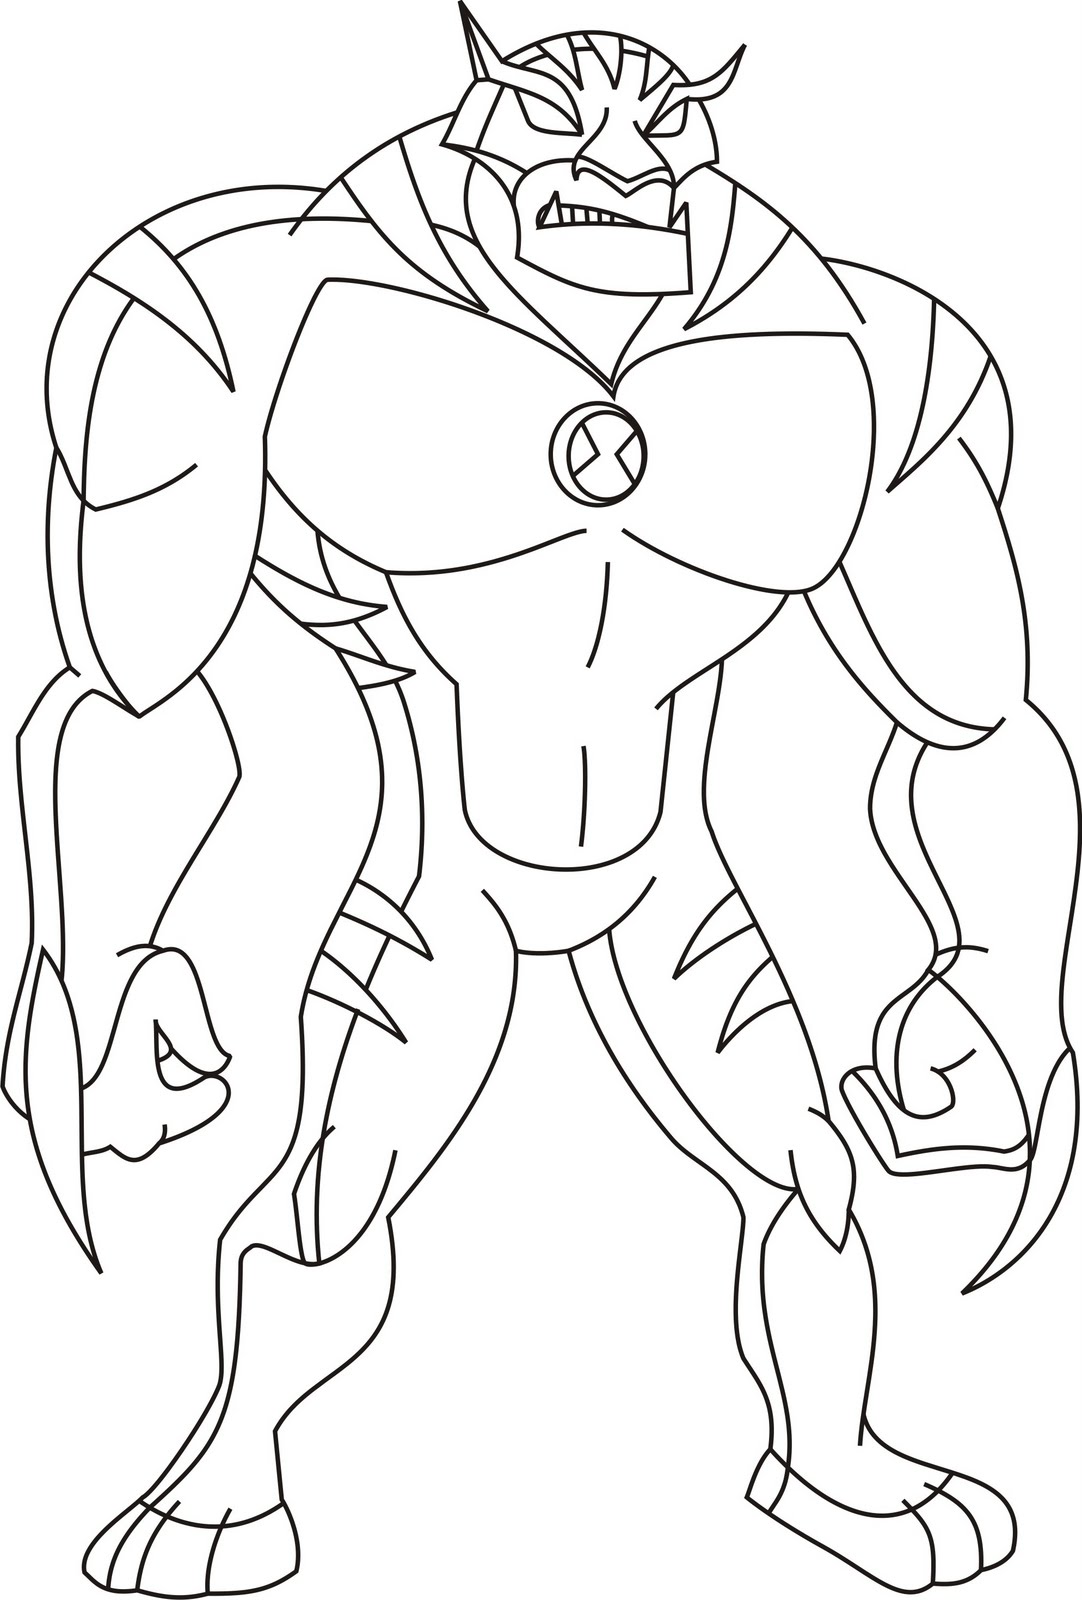 Ben 10 Ultimate Alien Coloring Pages 4